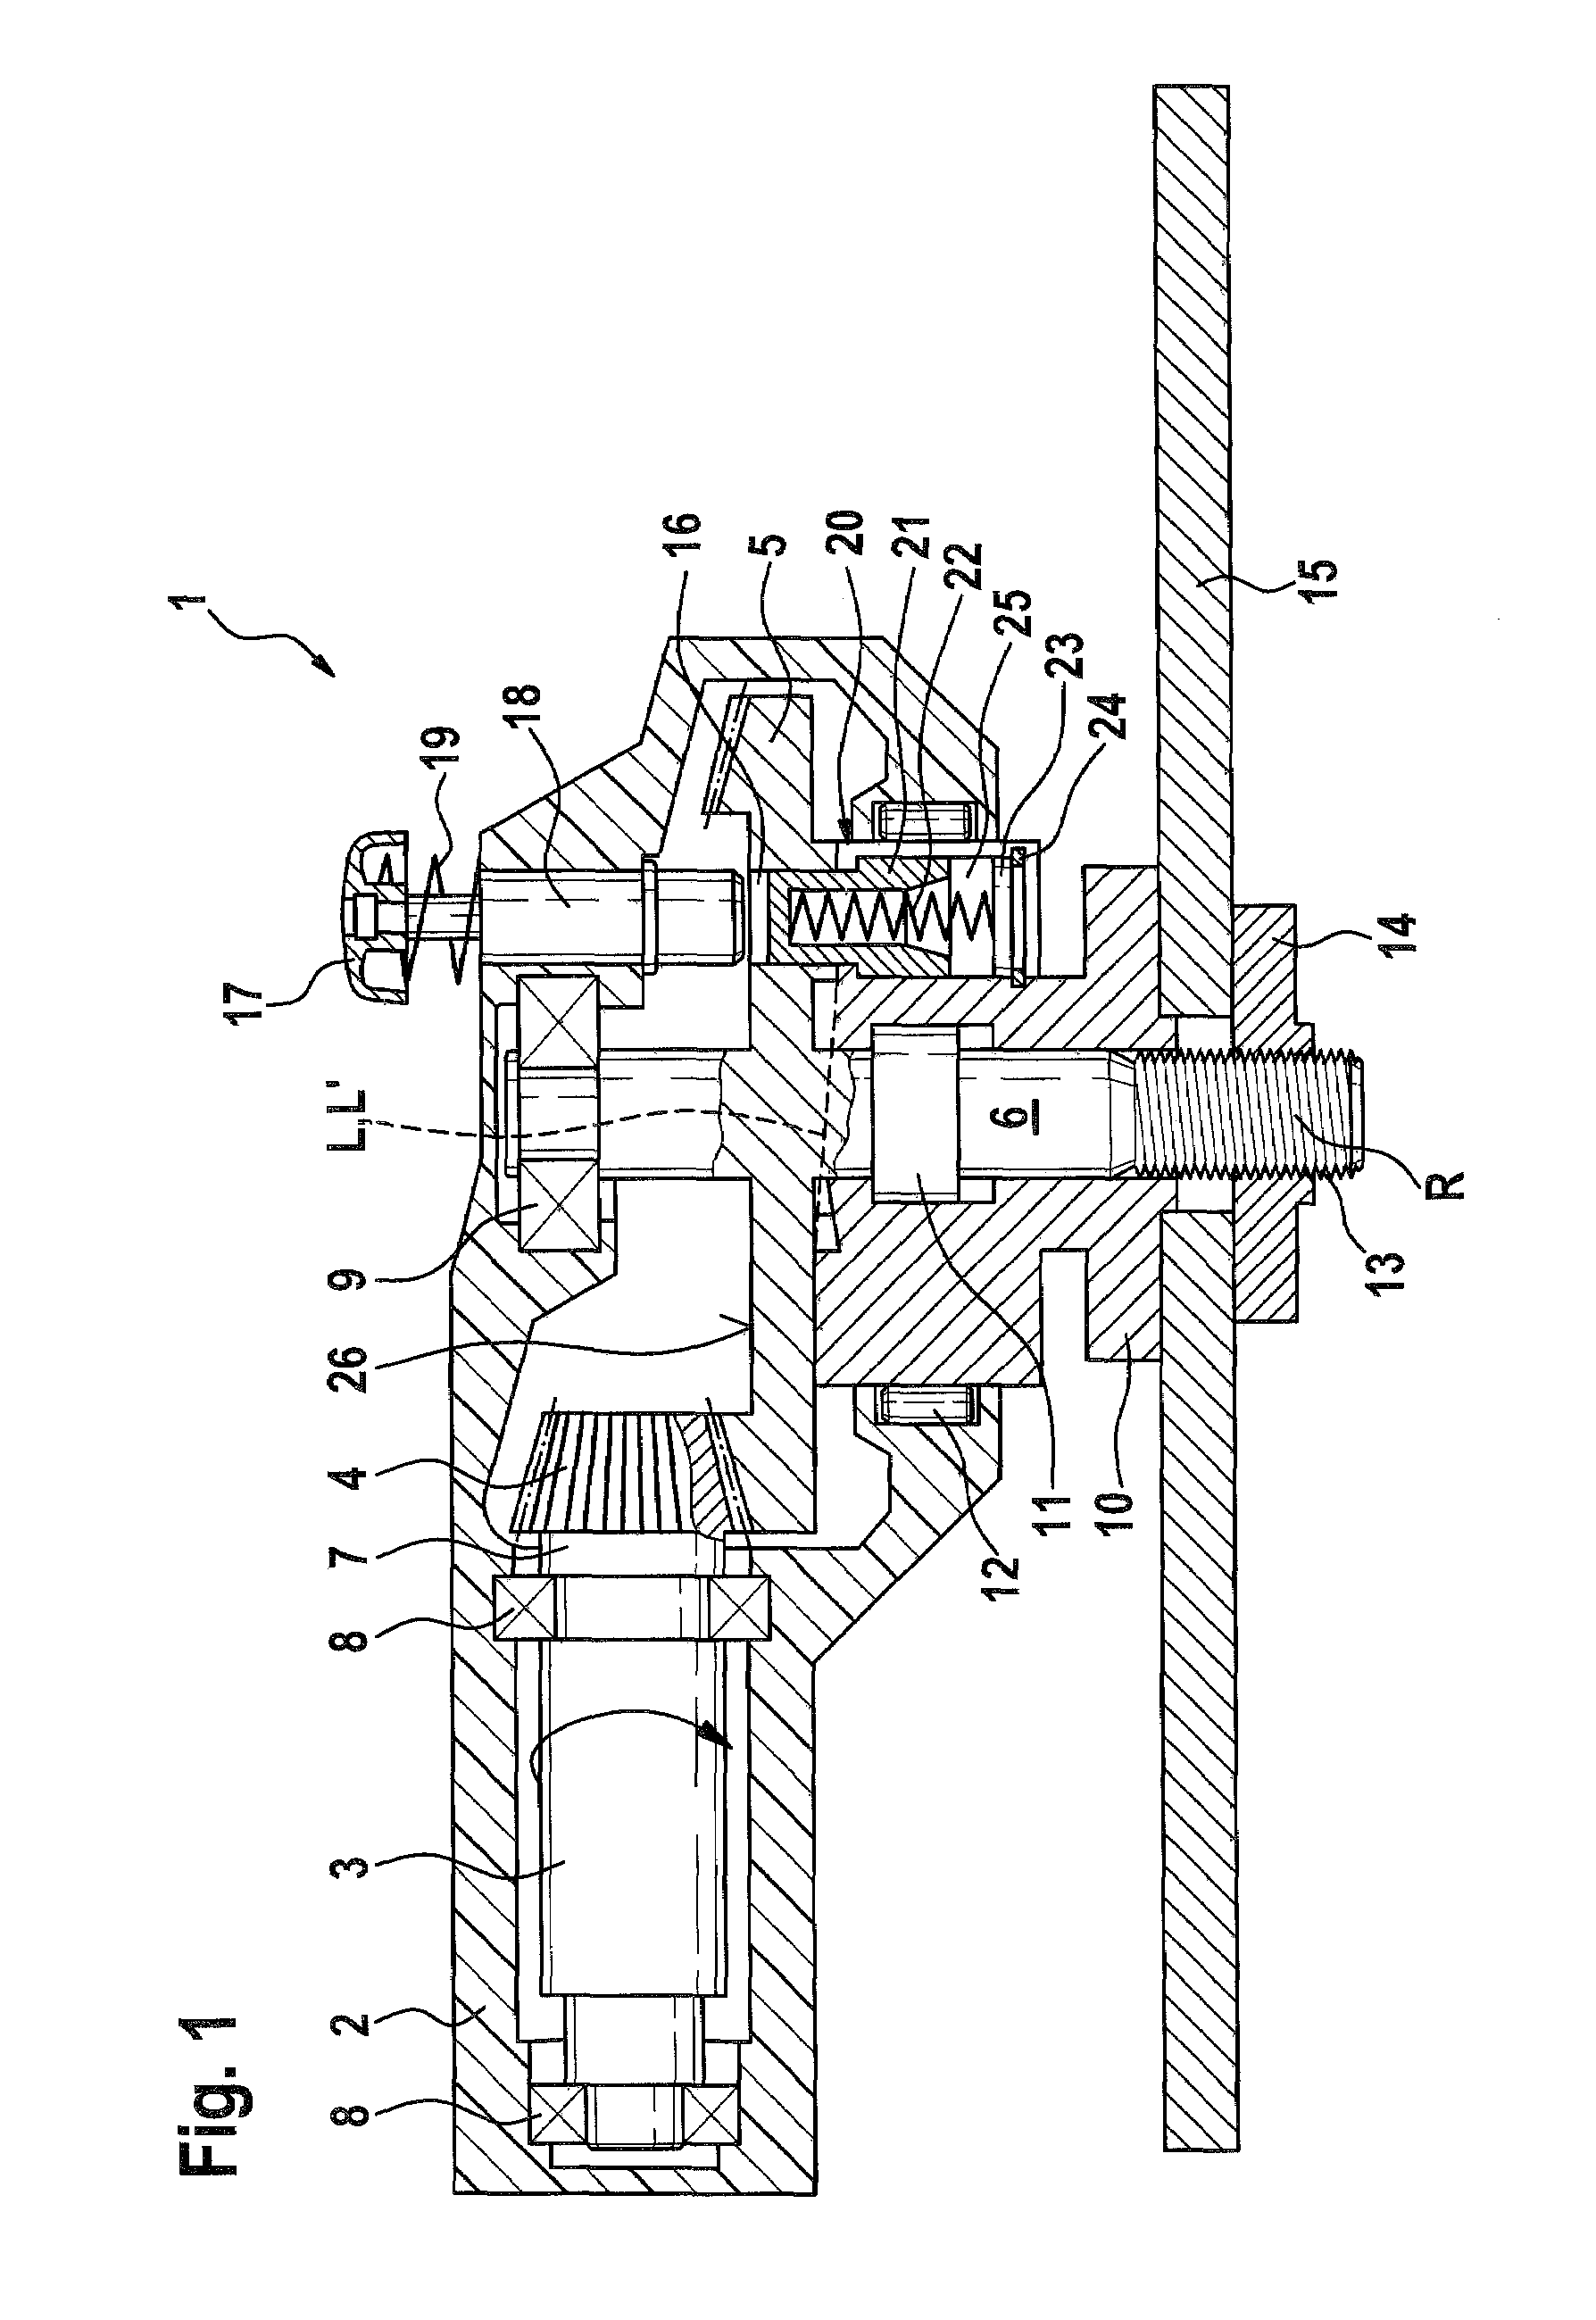 Clamping fixture for detachably fastening a disk-shaped tool